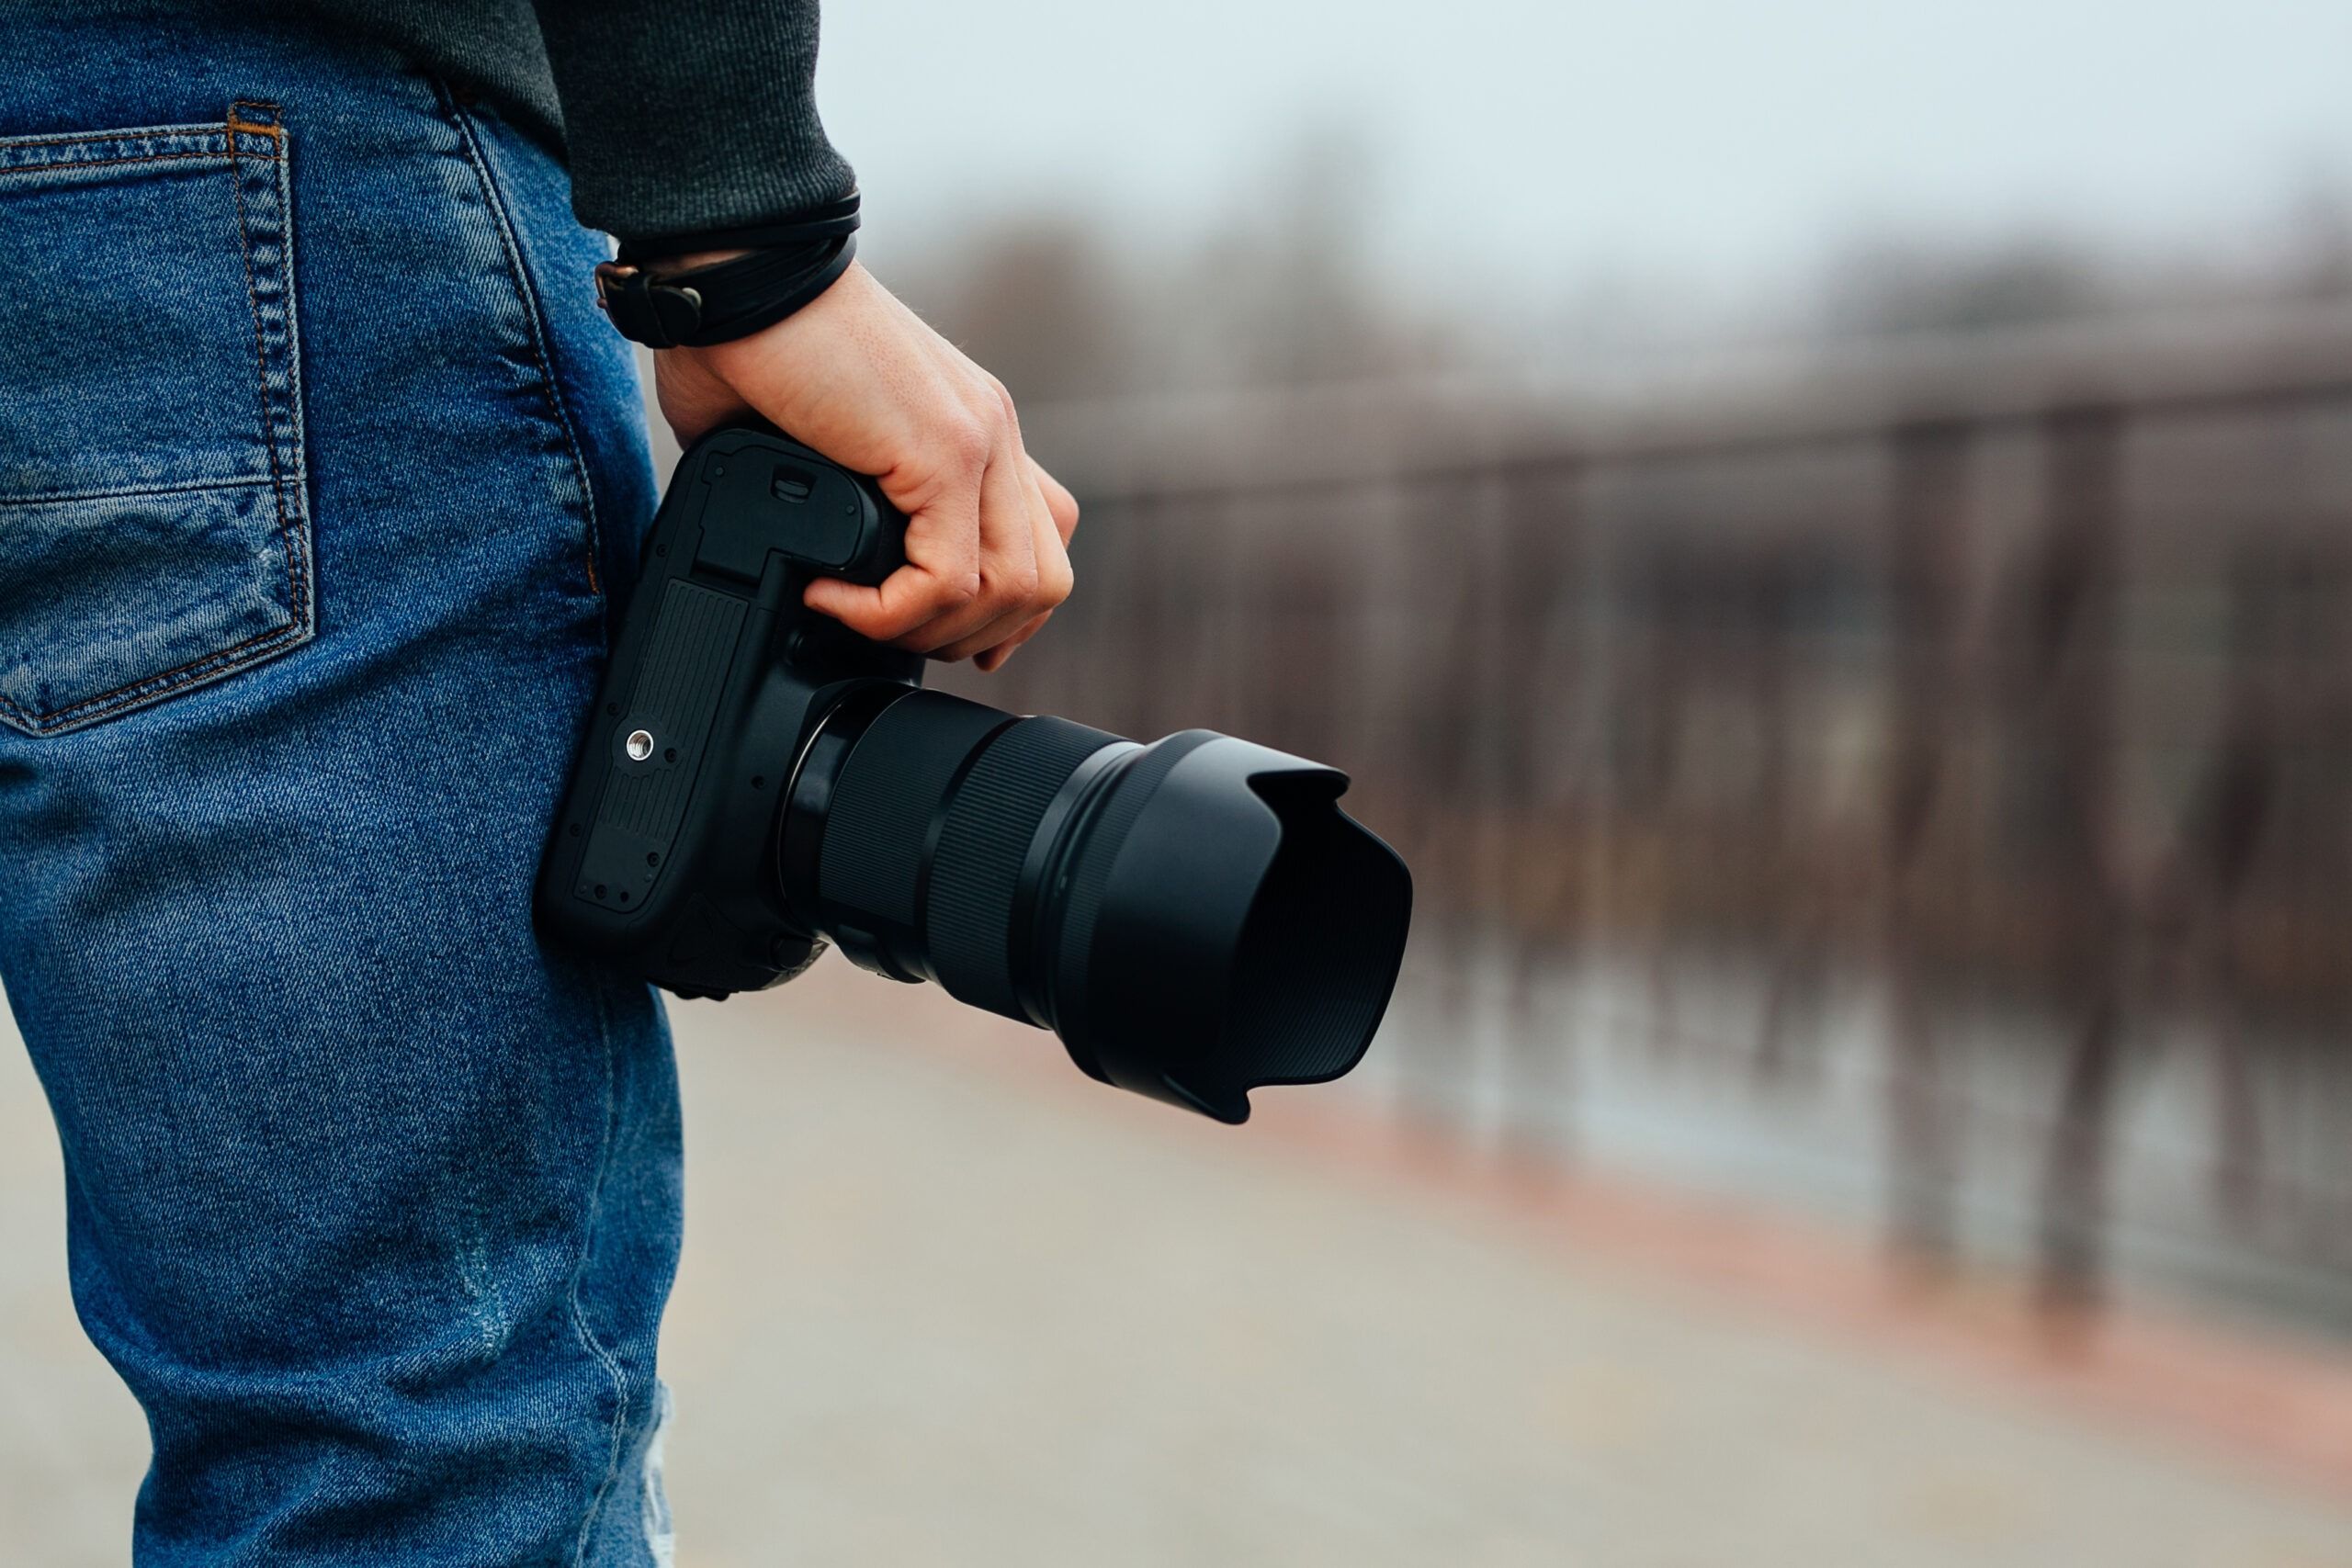 Close-up view of male hand holding professional camera on the street. Dressed in jeans.